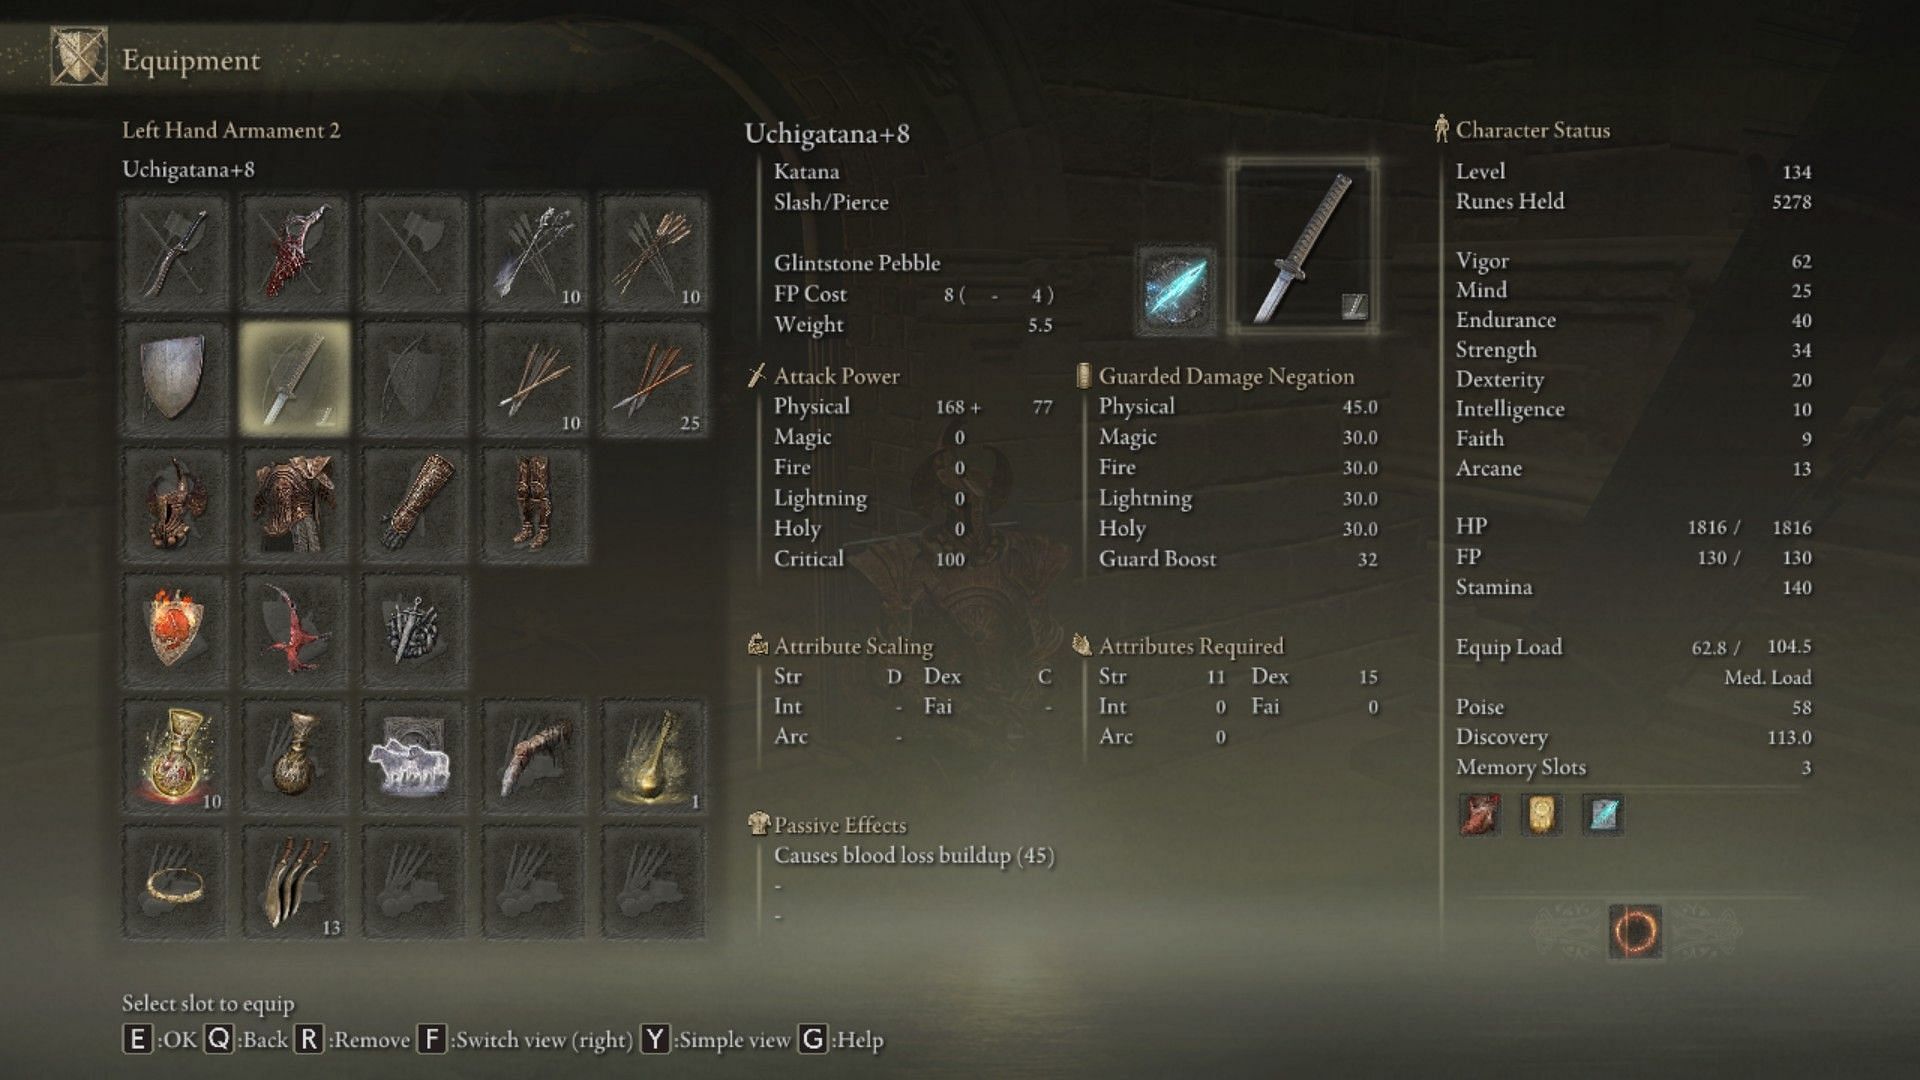 The immense versatility of the Uchigatana makes it a must-have weapon in the game (Image via Elden Ring)